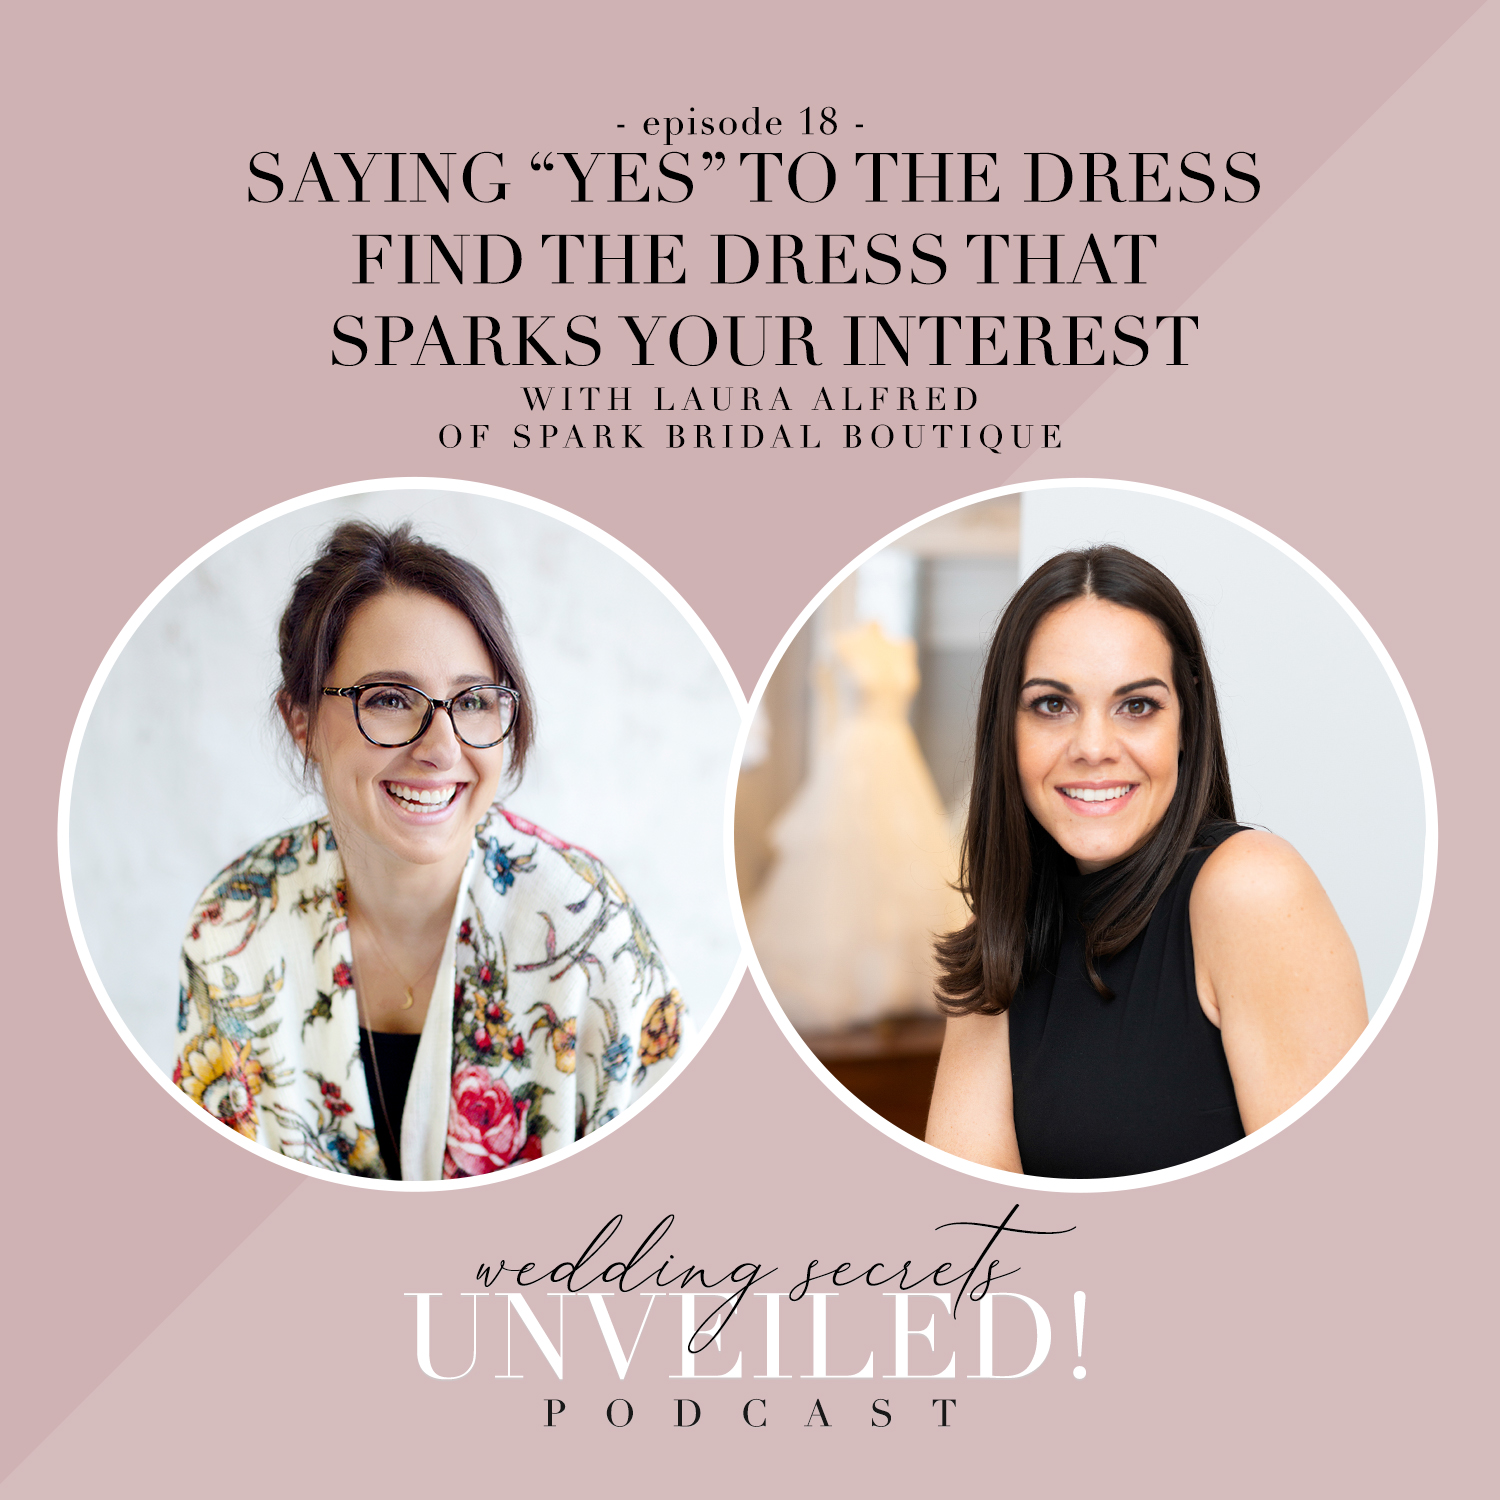 Saying "Yes" to the Dress: interview with Laura Alfred of Sparks Bridal in Cranston RI on Wedding Secrets Unveiled! podcast